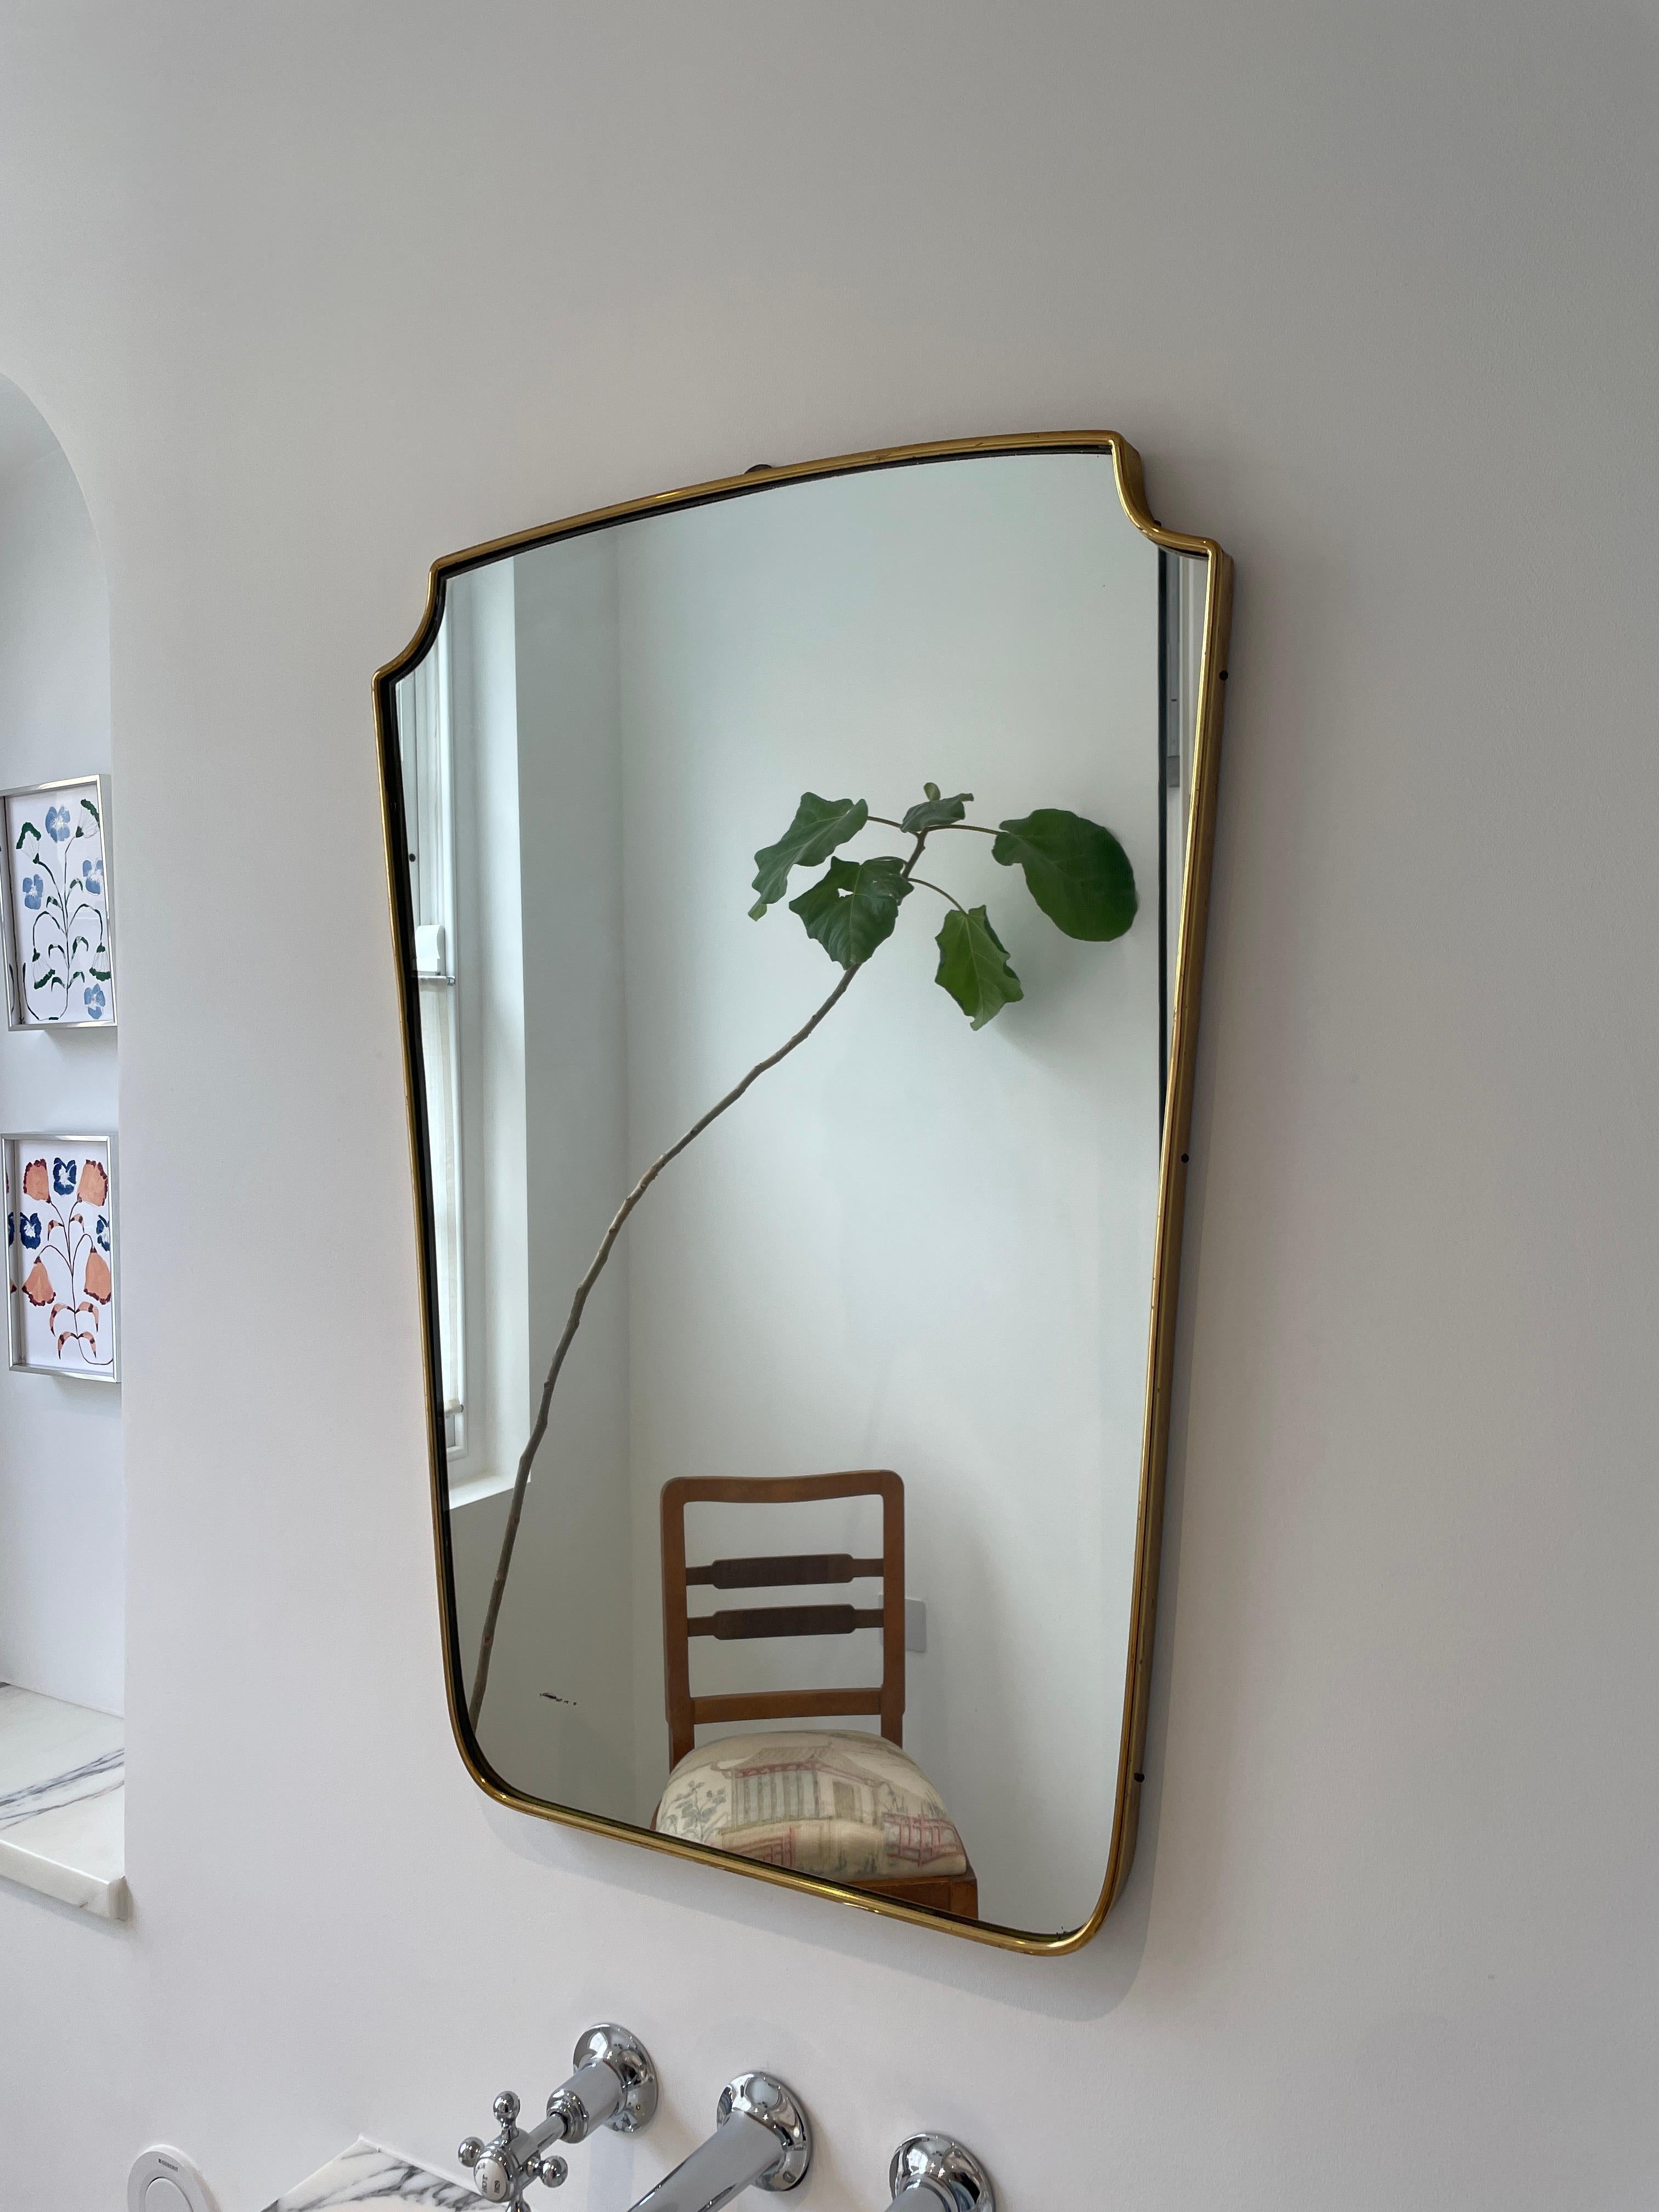 Designer: Unknown, Italian
Date: 1950s
Materials: Brass, wood, glass

Description: The 1950s Italian brass mirror is a vintage decorative item that reflects the distinctive style and craftsmanship of mid-century Italian design. It features a frame